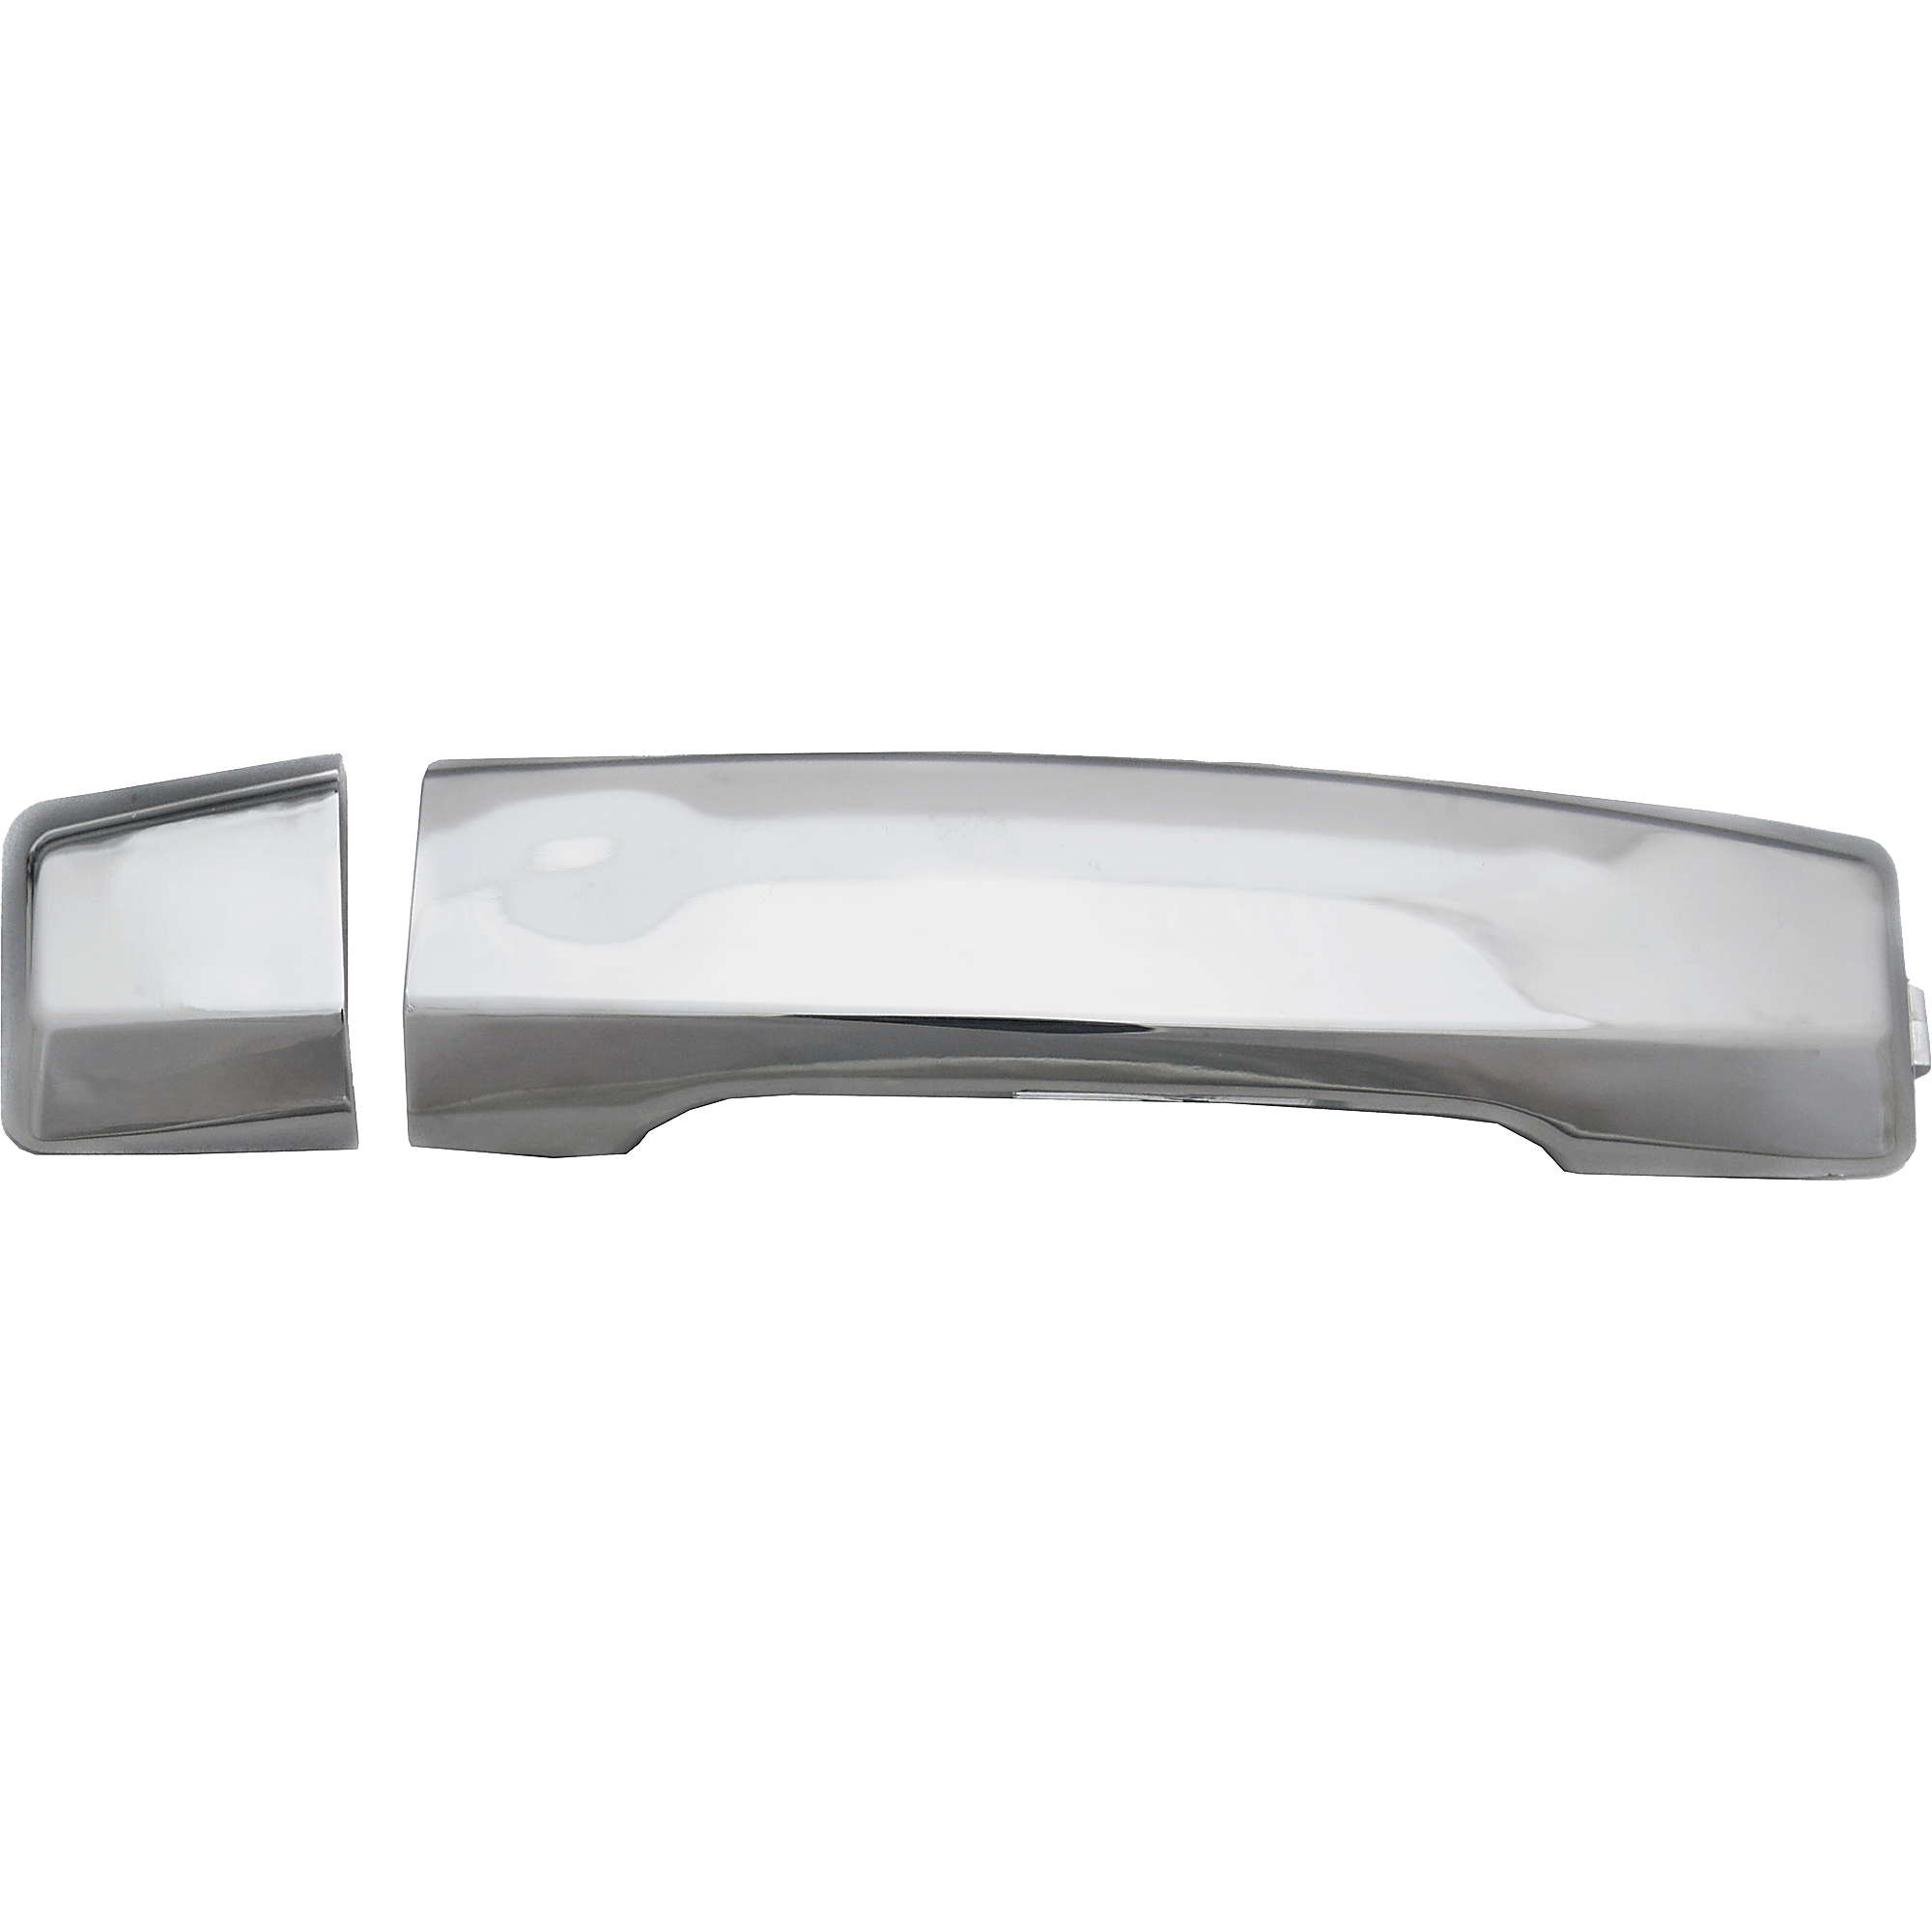 Triple Chrome Plated 2 REAR Vertical Door Handle Cover for 04-10 Infiniti QX56